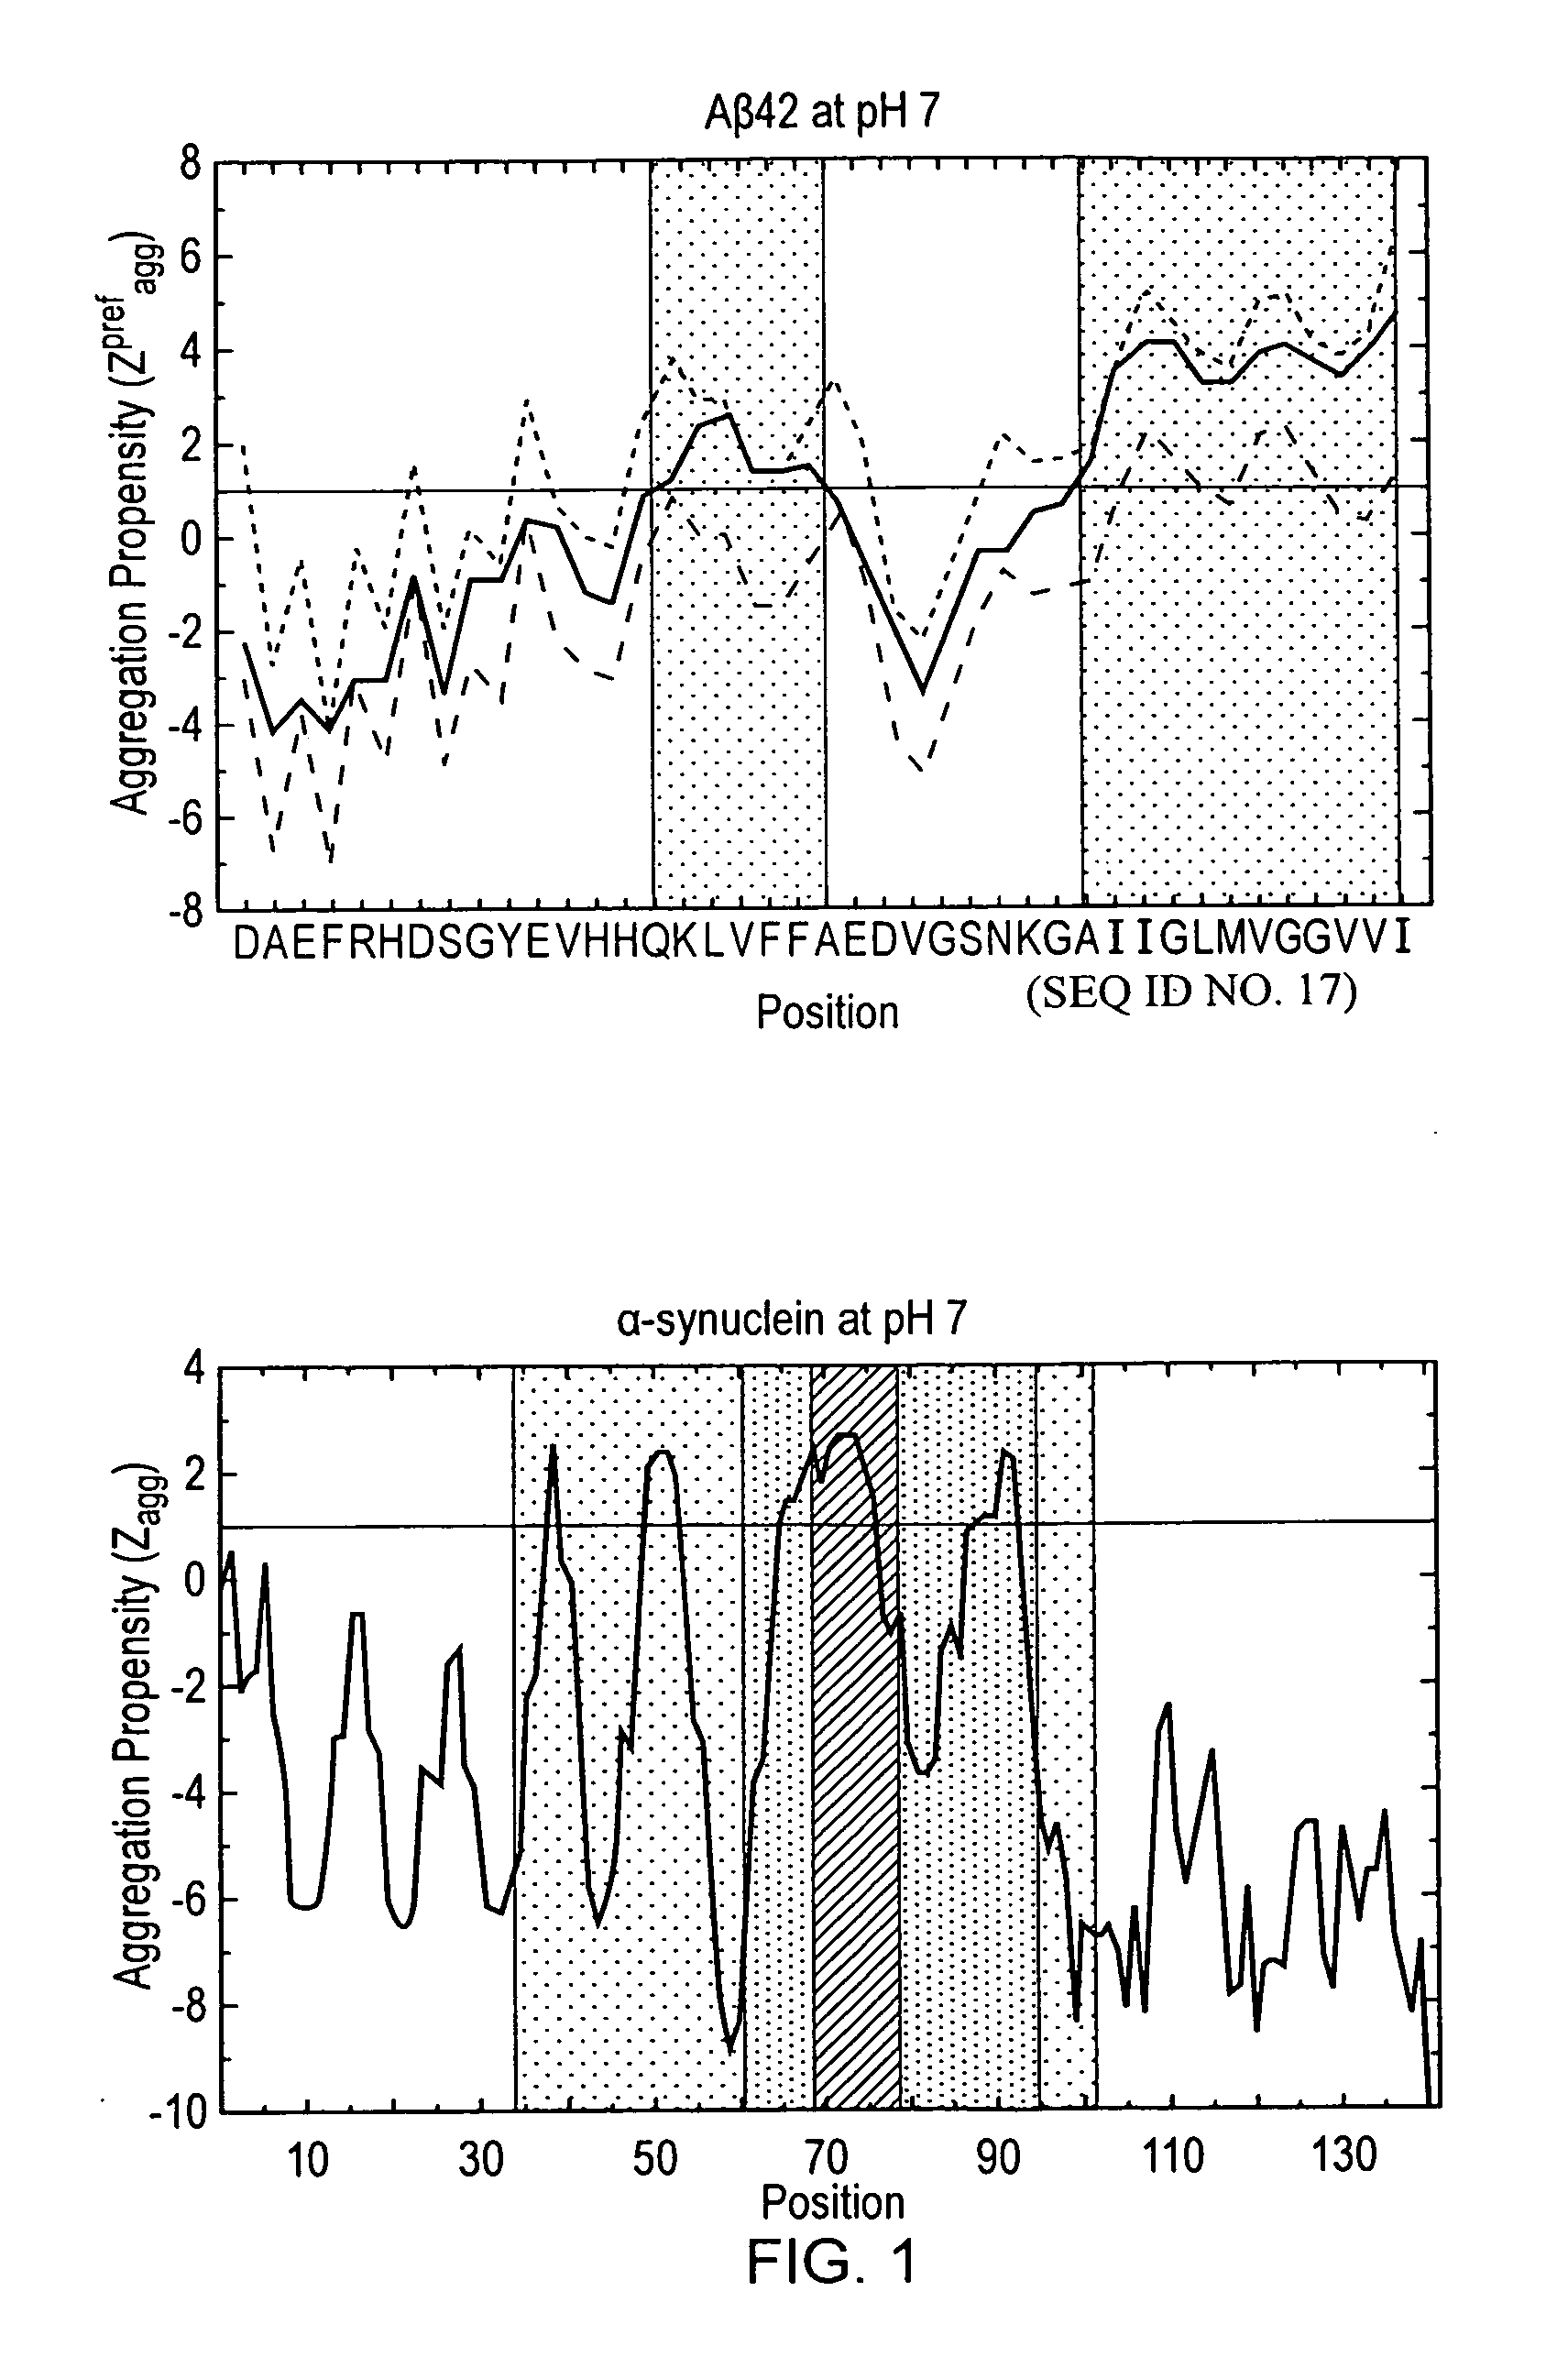 Method for predicting protein aggregation and designing aggregation inhibitors